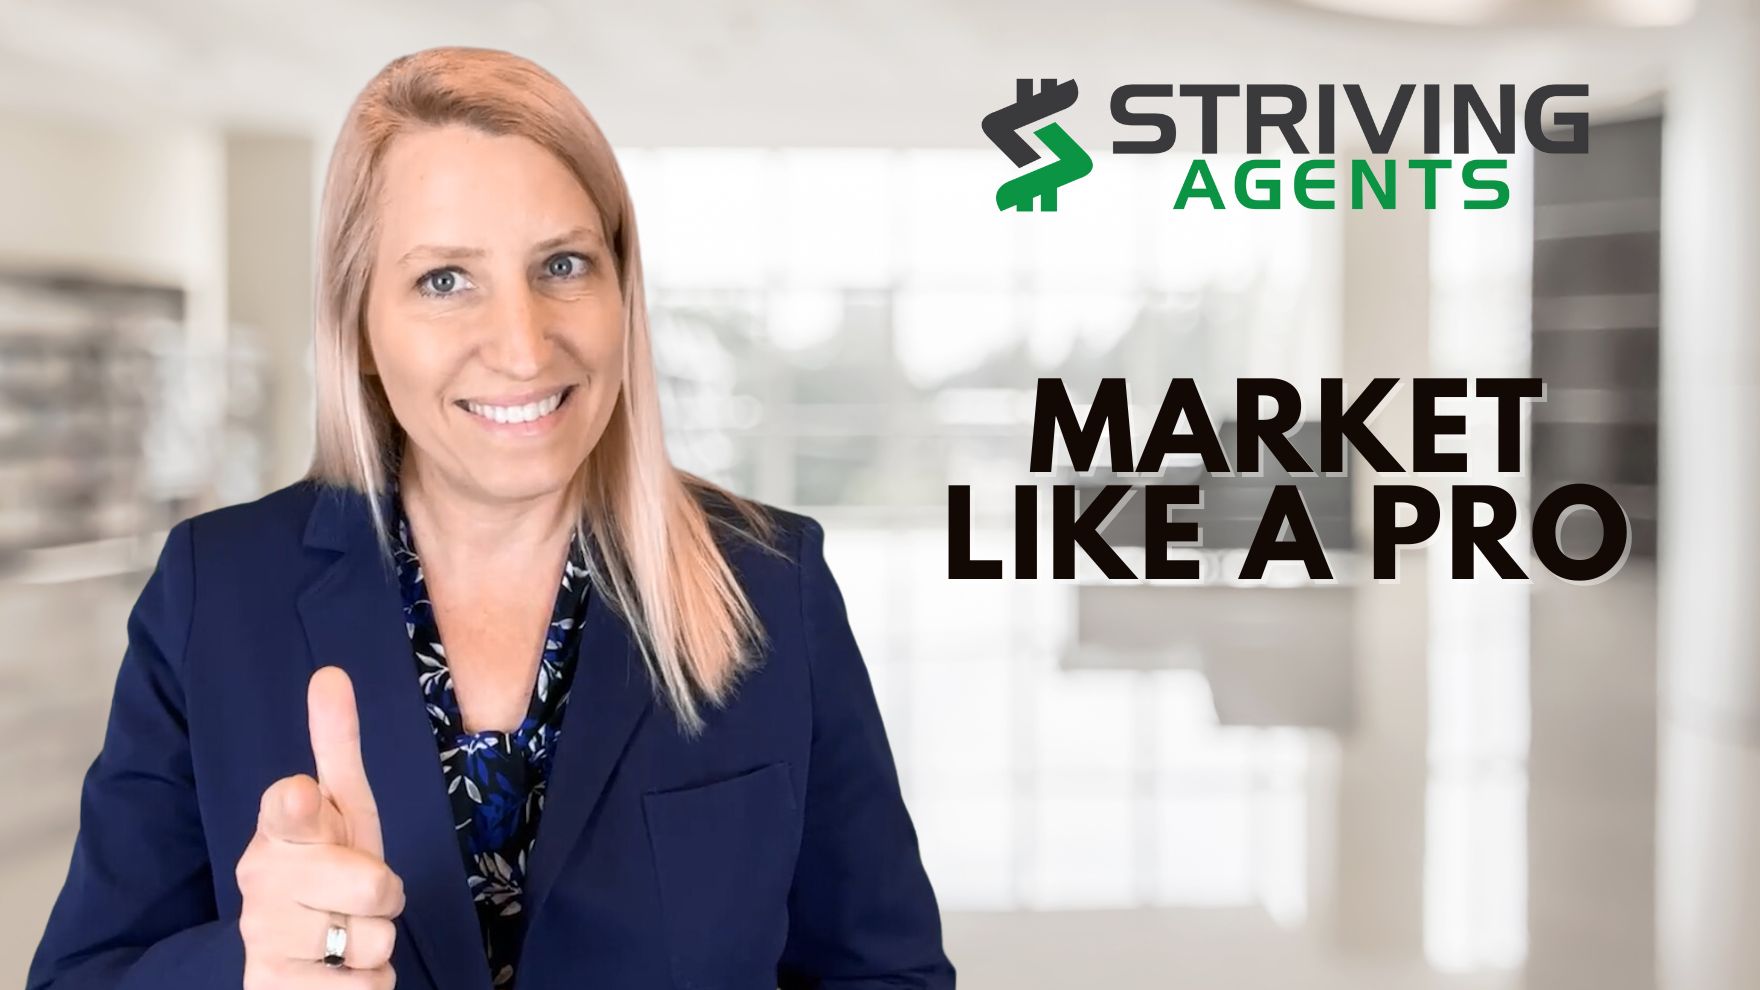 Elevate Your Agent Profile with 5 Proven Marketing Tips